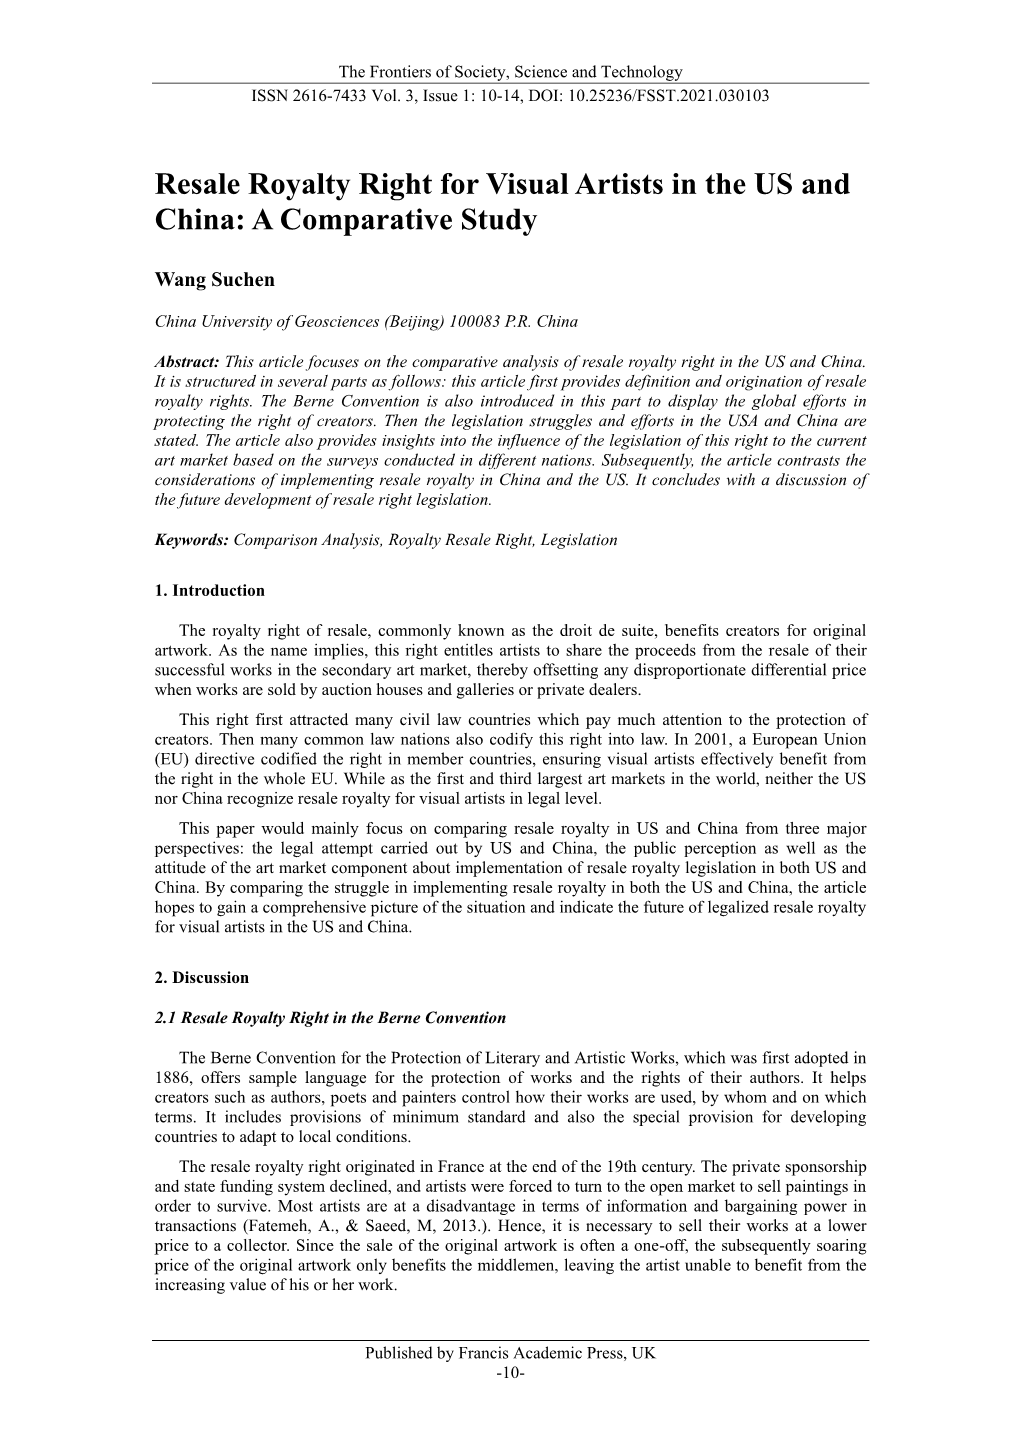 Resale Royalty Right for Visual Artists in the US and China: a Comparative Study